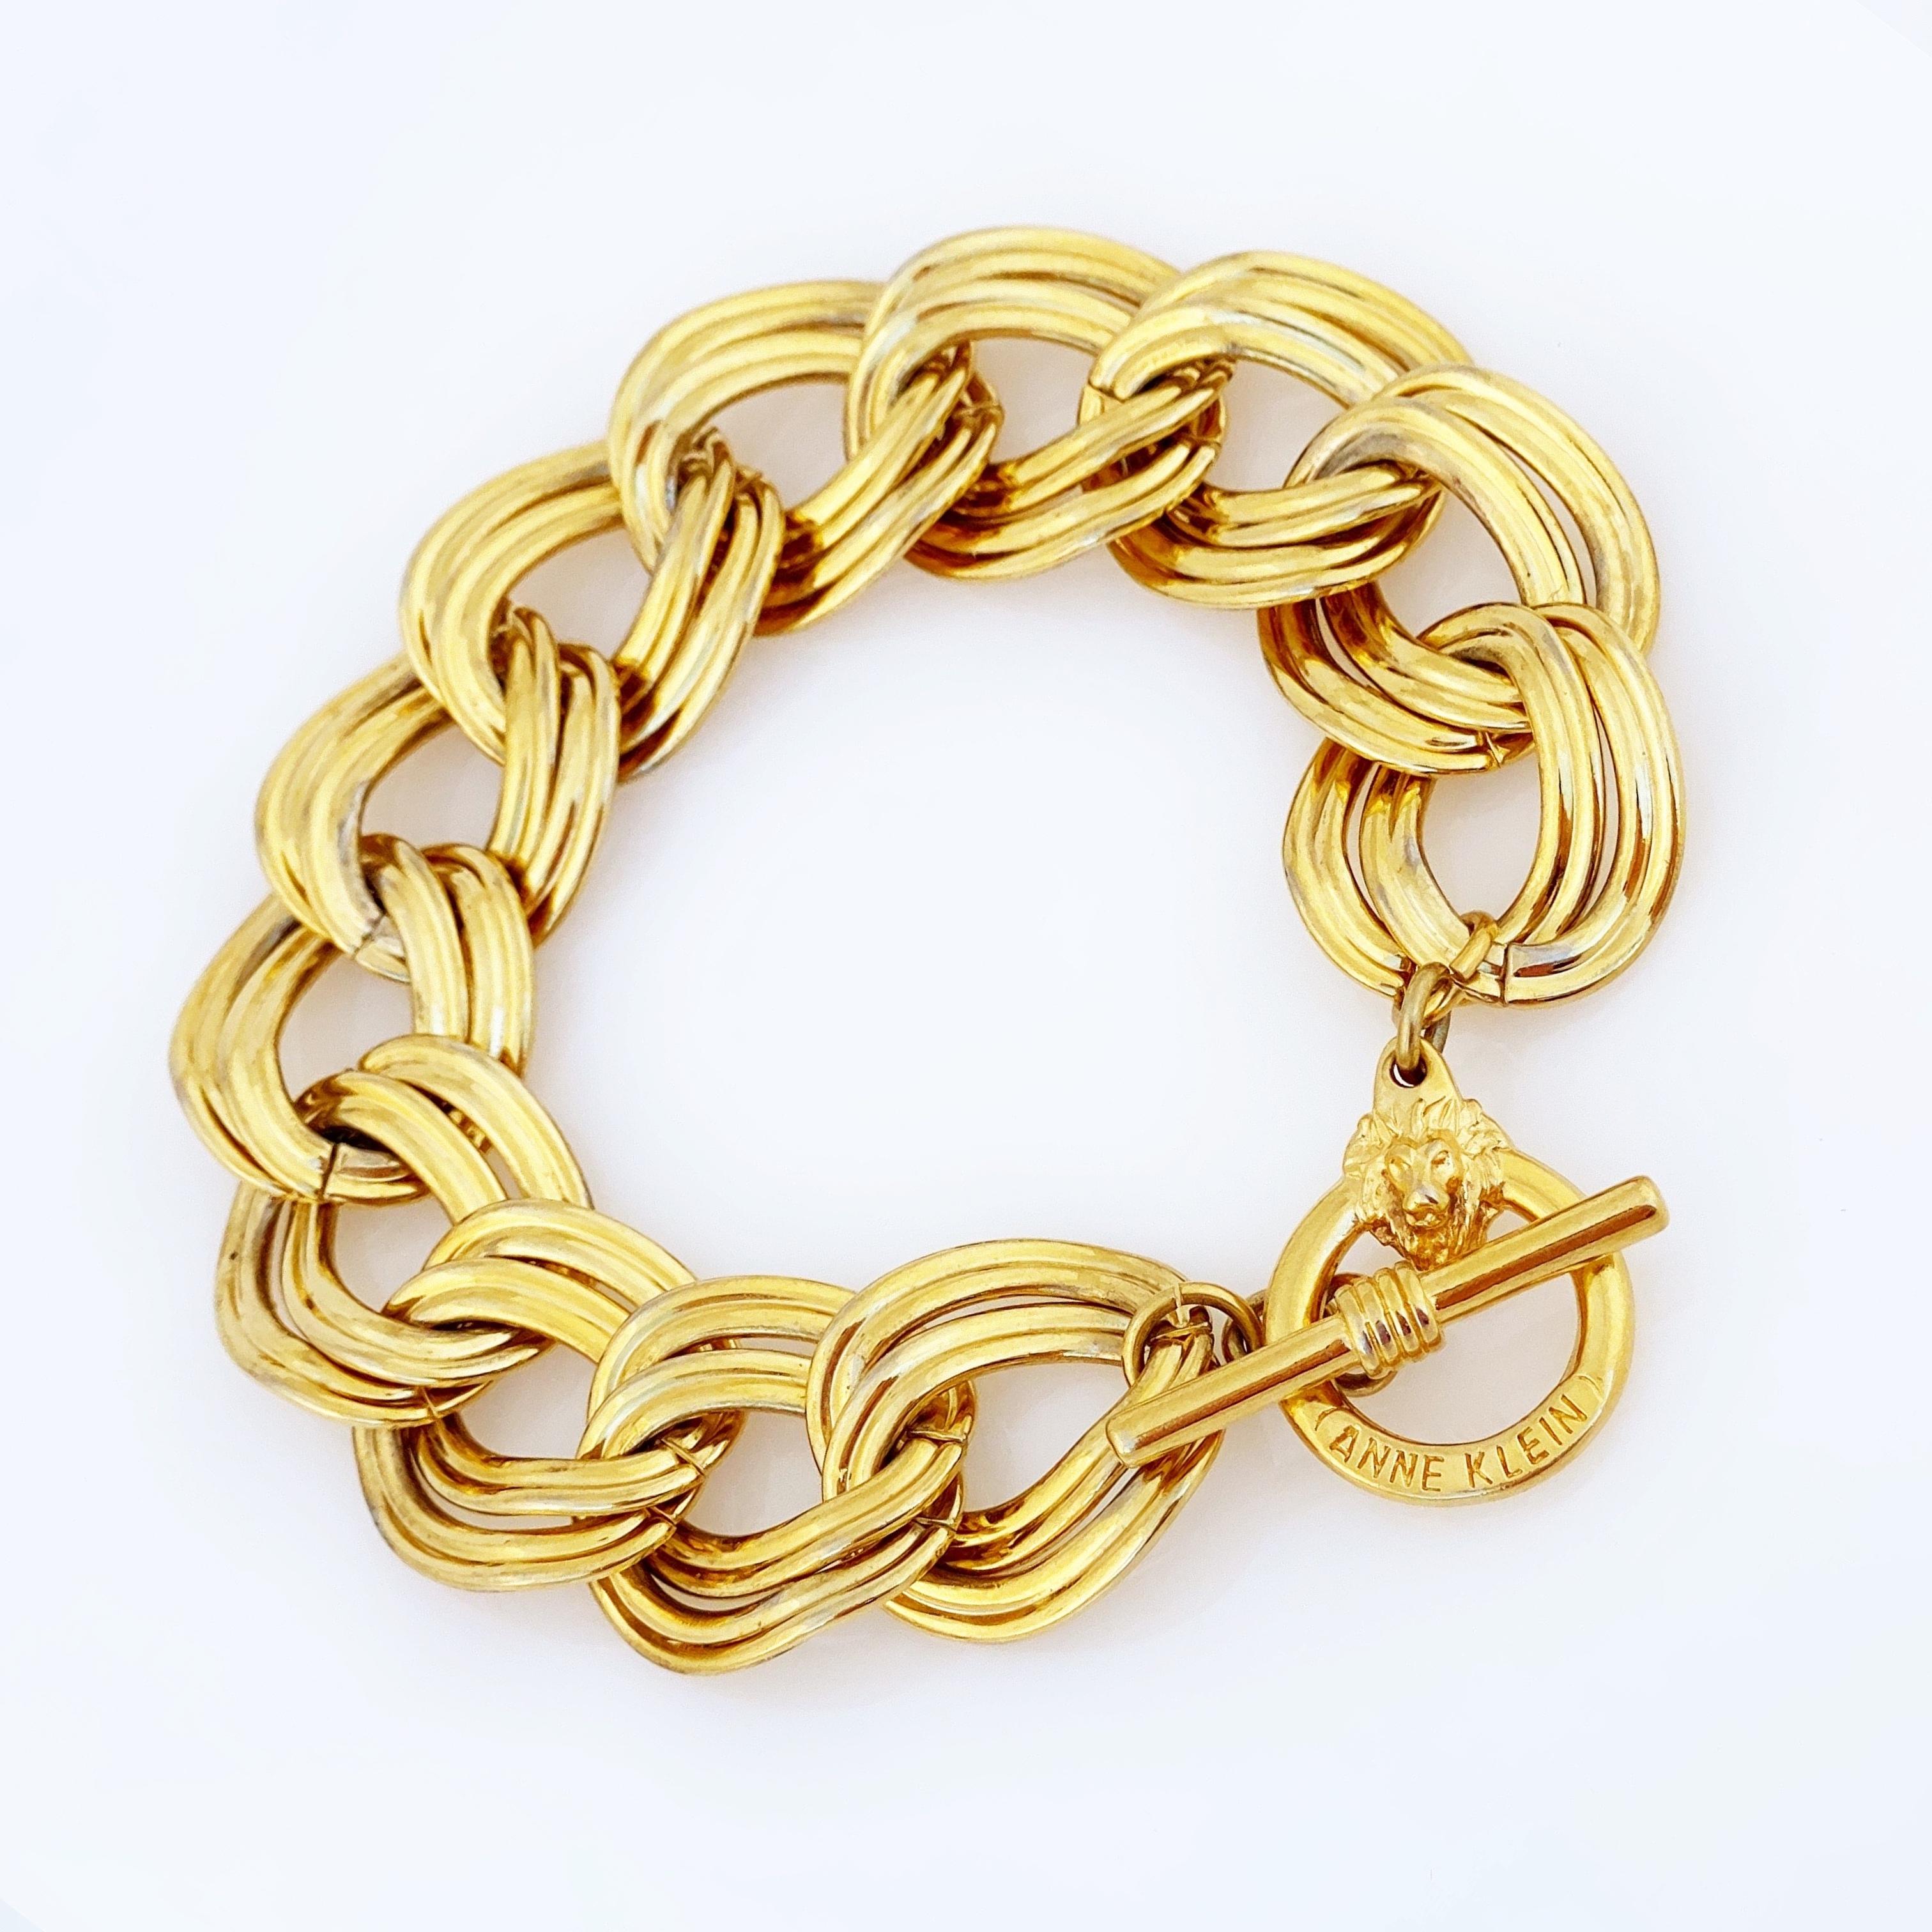 Modern Gold Oval Link Chain Bracelet With Lion Clasp By Anne Klein, 1980s